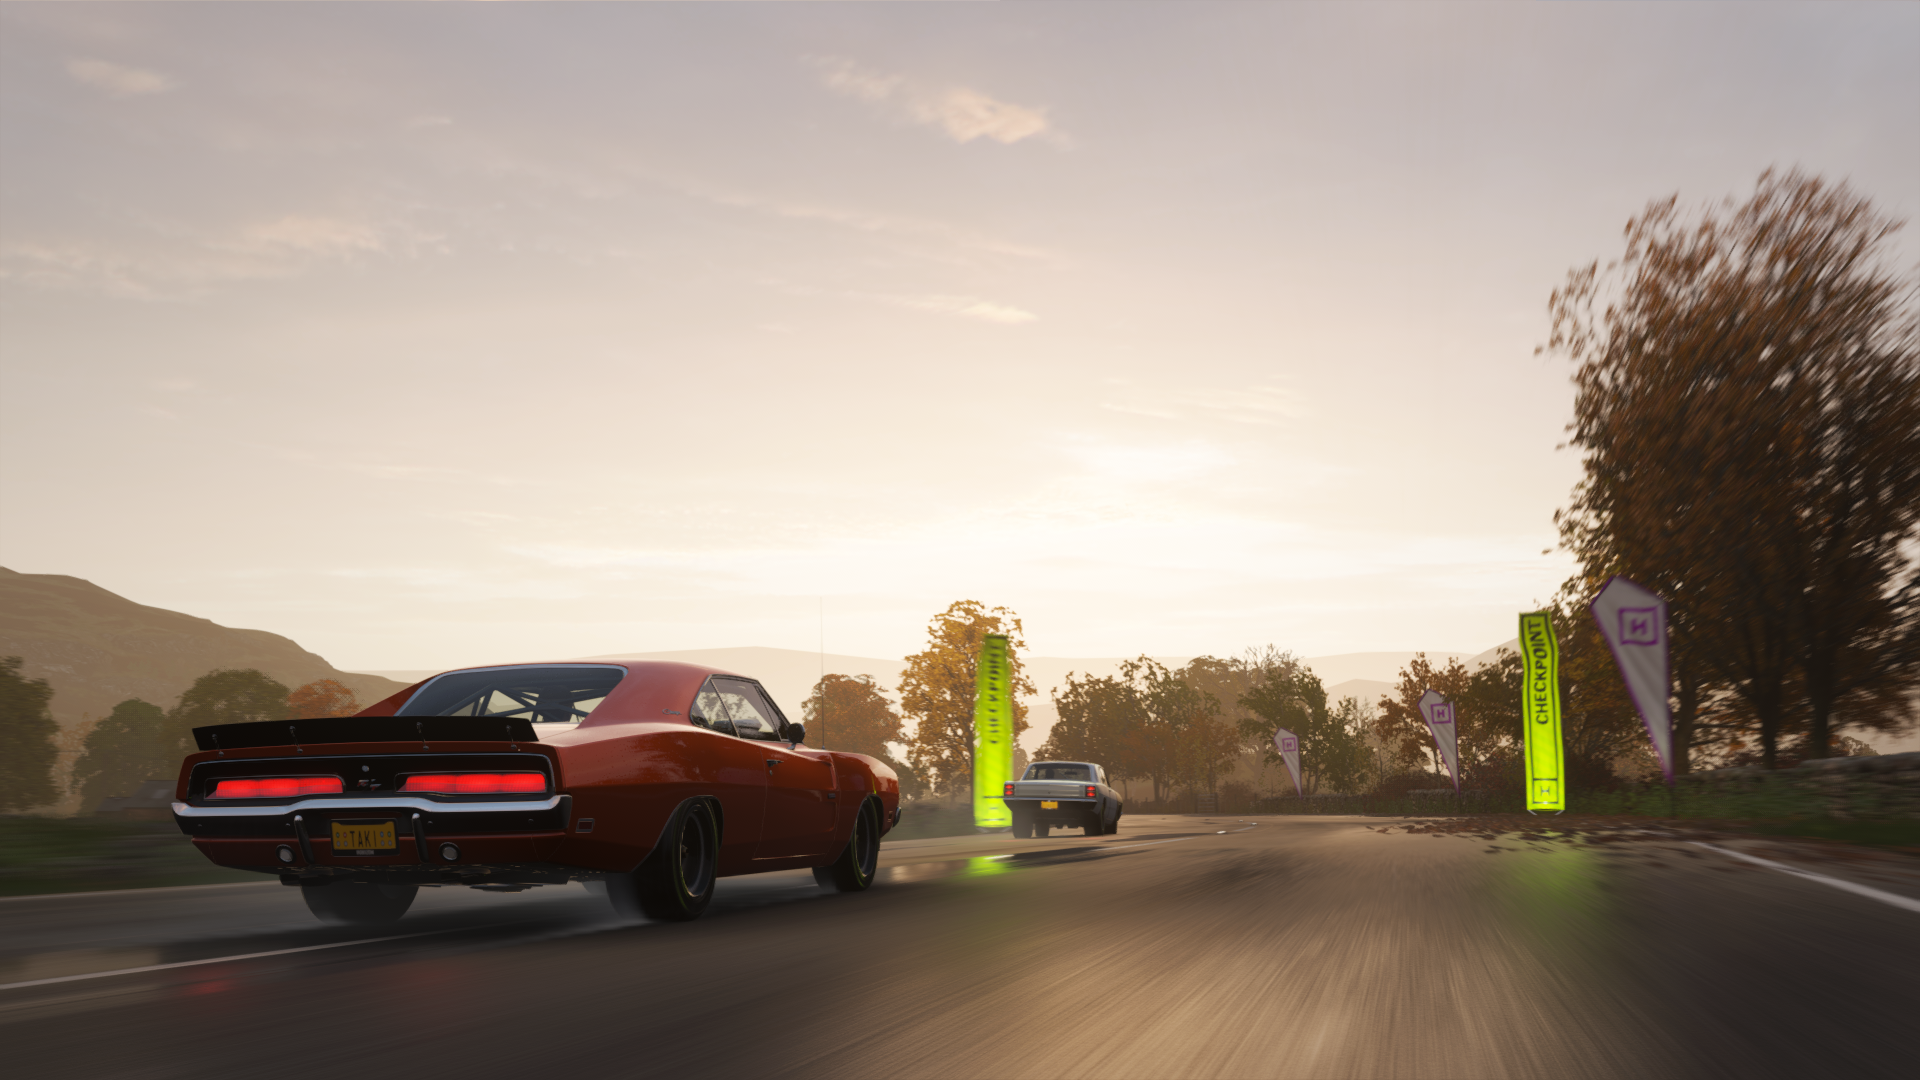 Forza Horizon 4 Car Racing Dodge Dodge Charger Muscle Cars V8 Engine American Cars Video Games Turn  1920x1080